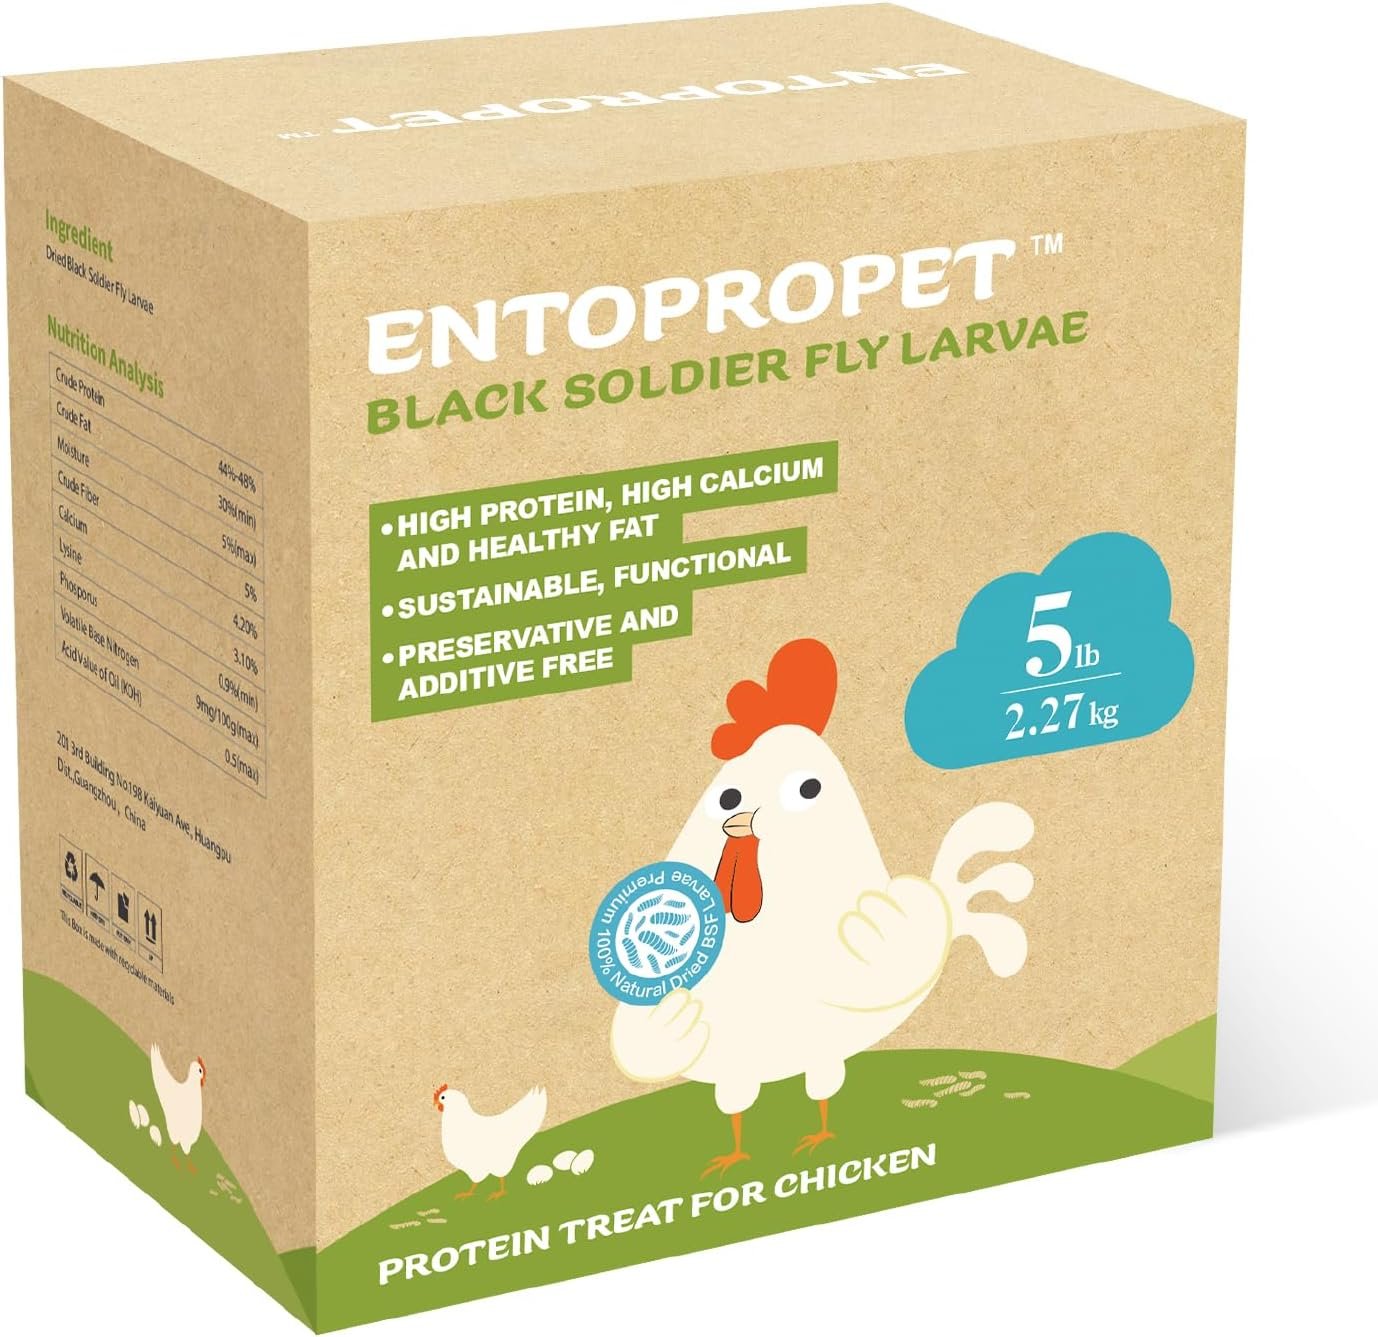 ENTOPROPET 5lbs Mealworm for Chickens - Dried Black Soldier Fly Larvae - More Calcium and Richer Protein Than Meal Worms, Non-GMO BSF Larvae Chicken Treat, Poultry Feed for Ducks,Birds